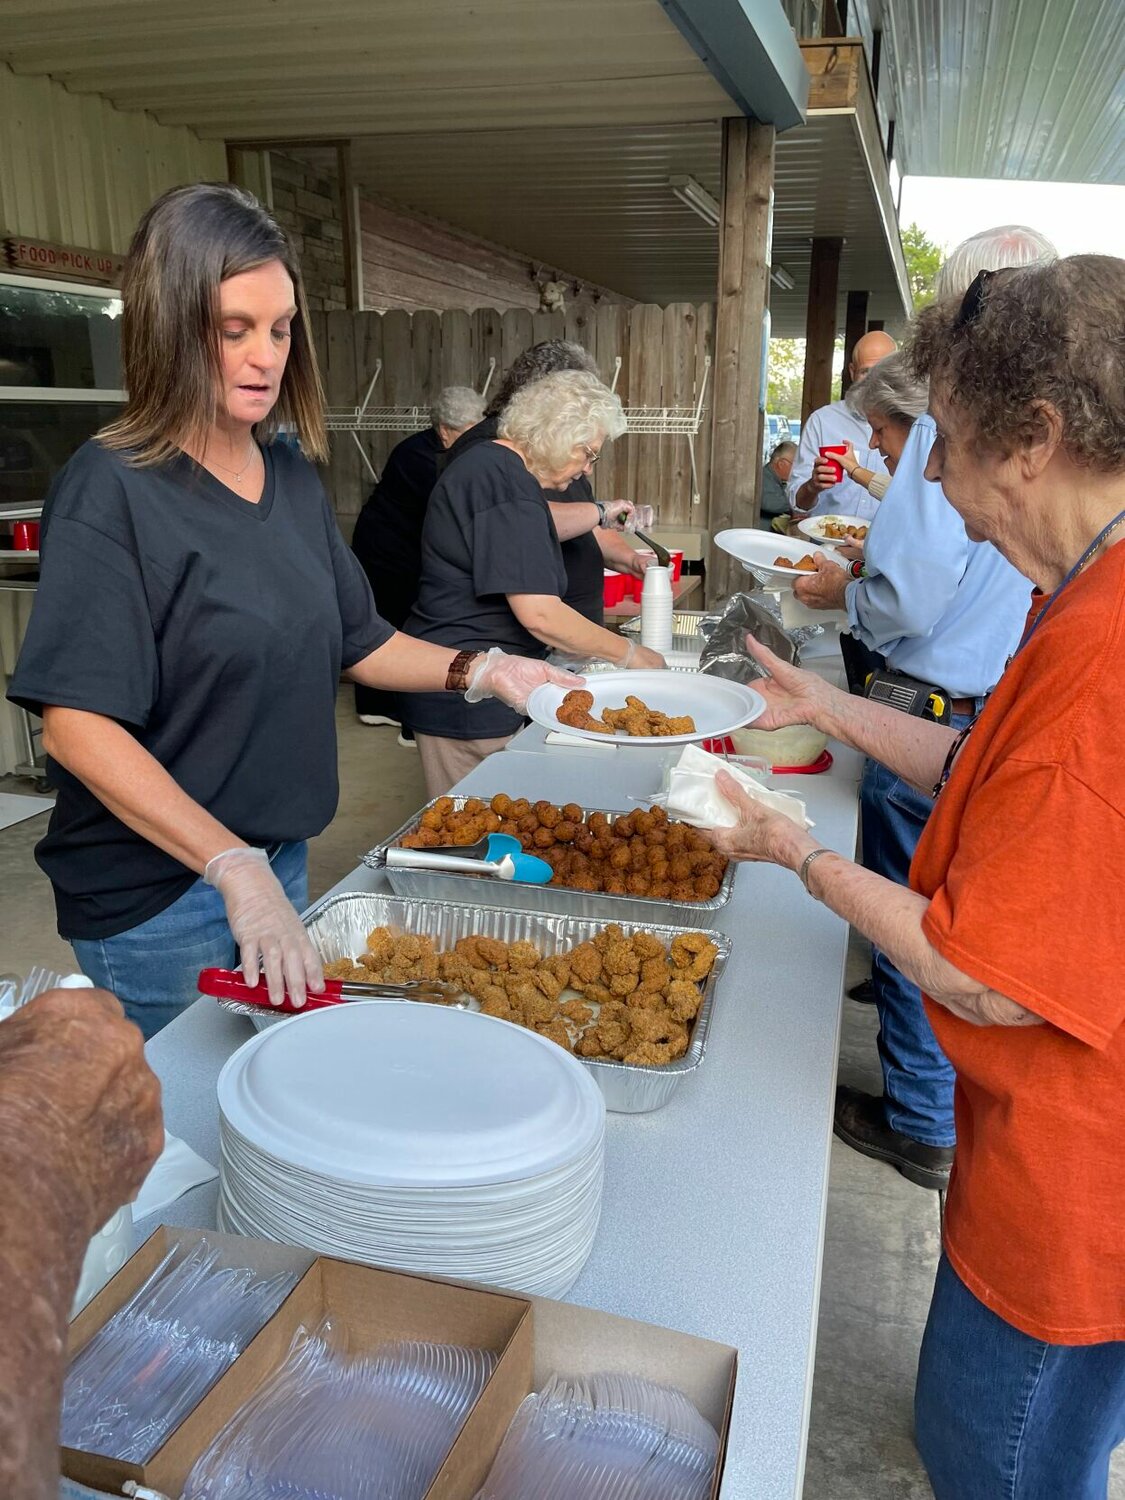 The Gideons provided a catfish meal for pastors appreciation.